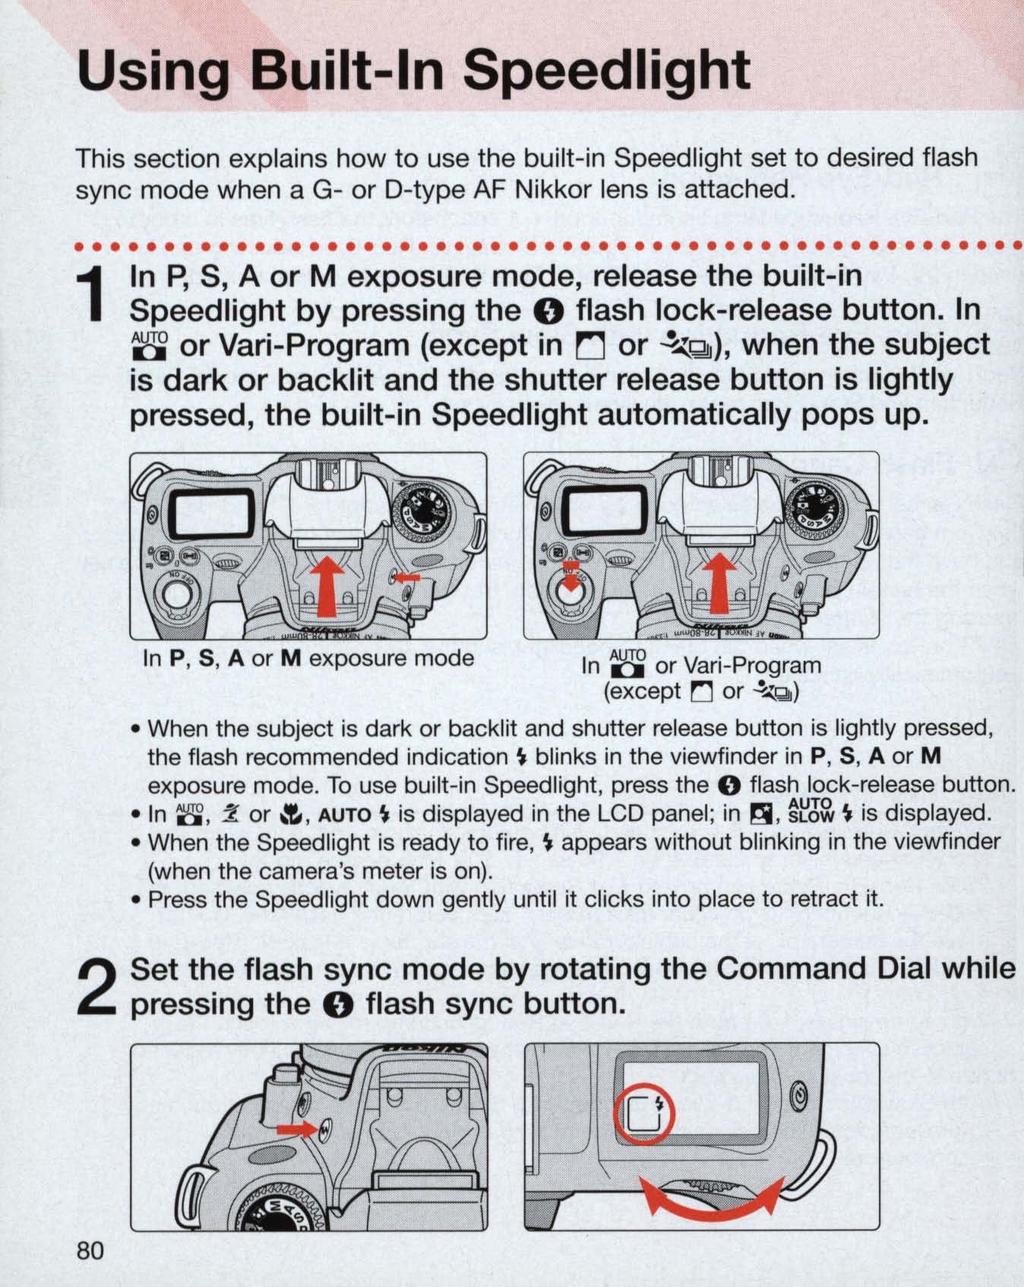 Using Built-In Speedlight This section explains how to use the built-in Speed light set to desired flash sync mode when a G- or D-type AF Nikkor lens is attached.